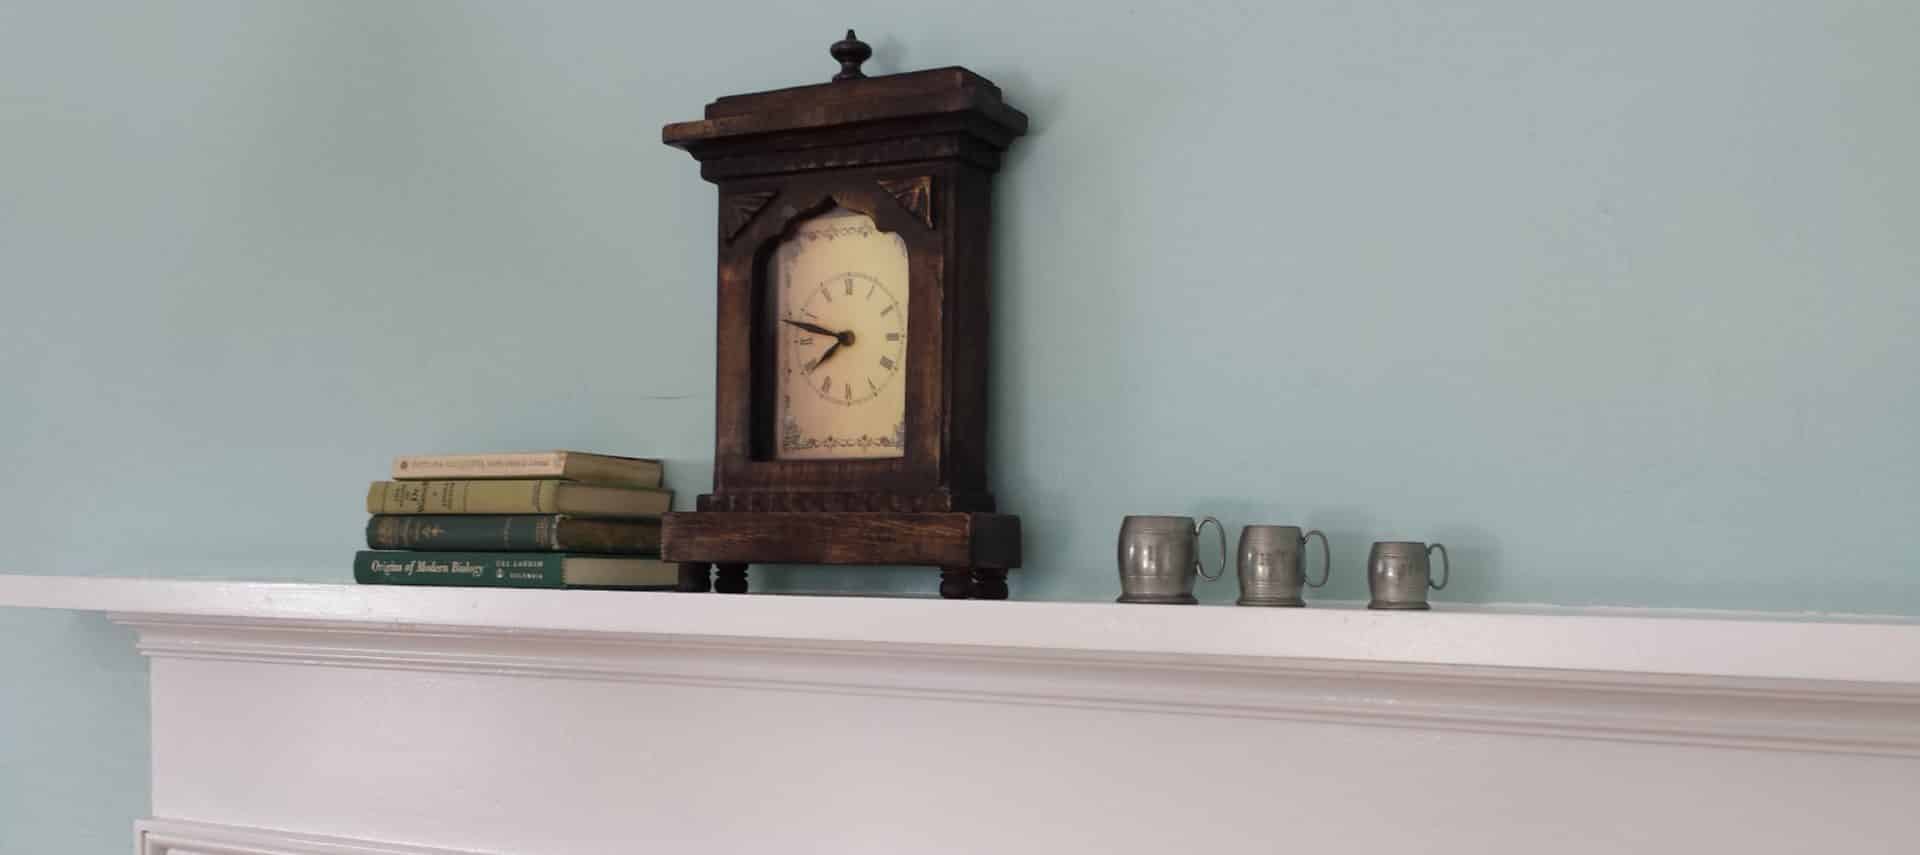 Close up view of old wooden mantel clock, books, and sliver cups on a white mantel with blue wall in the background